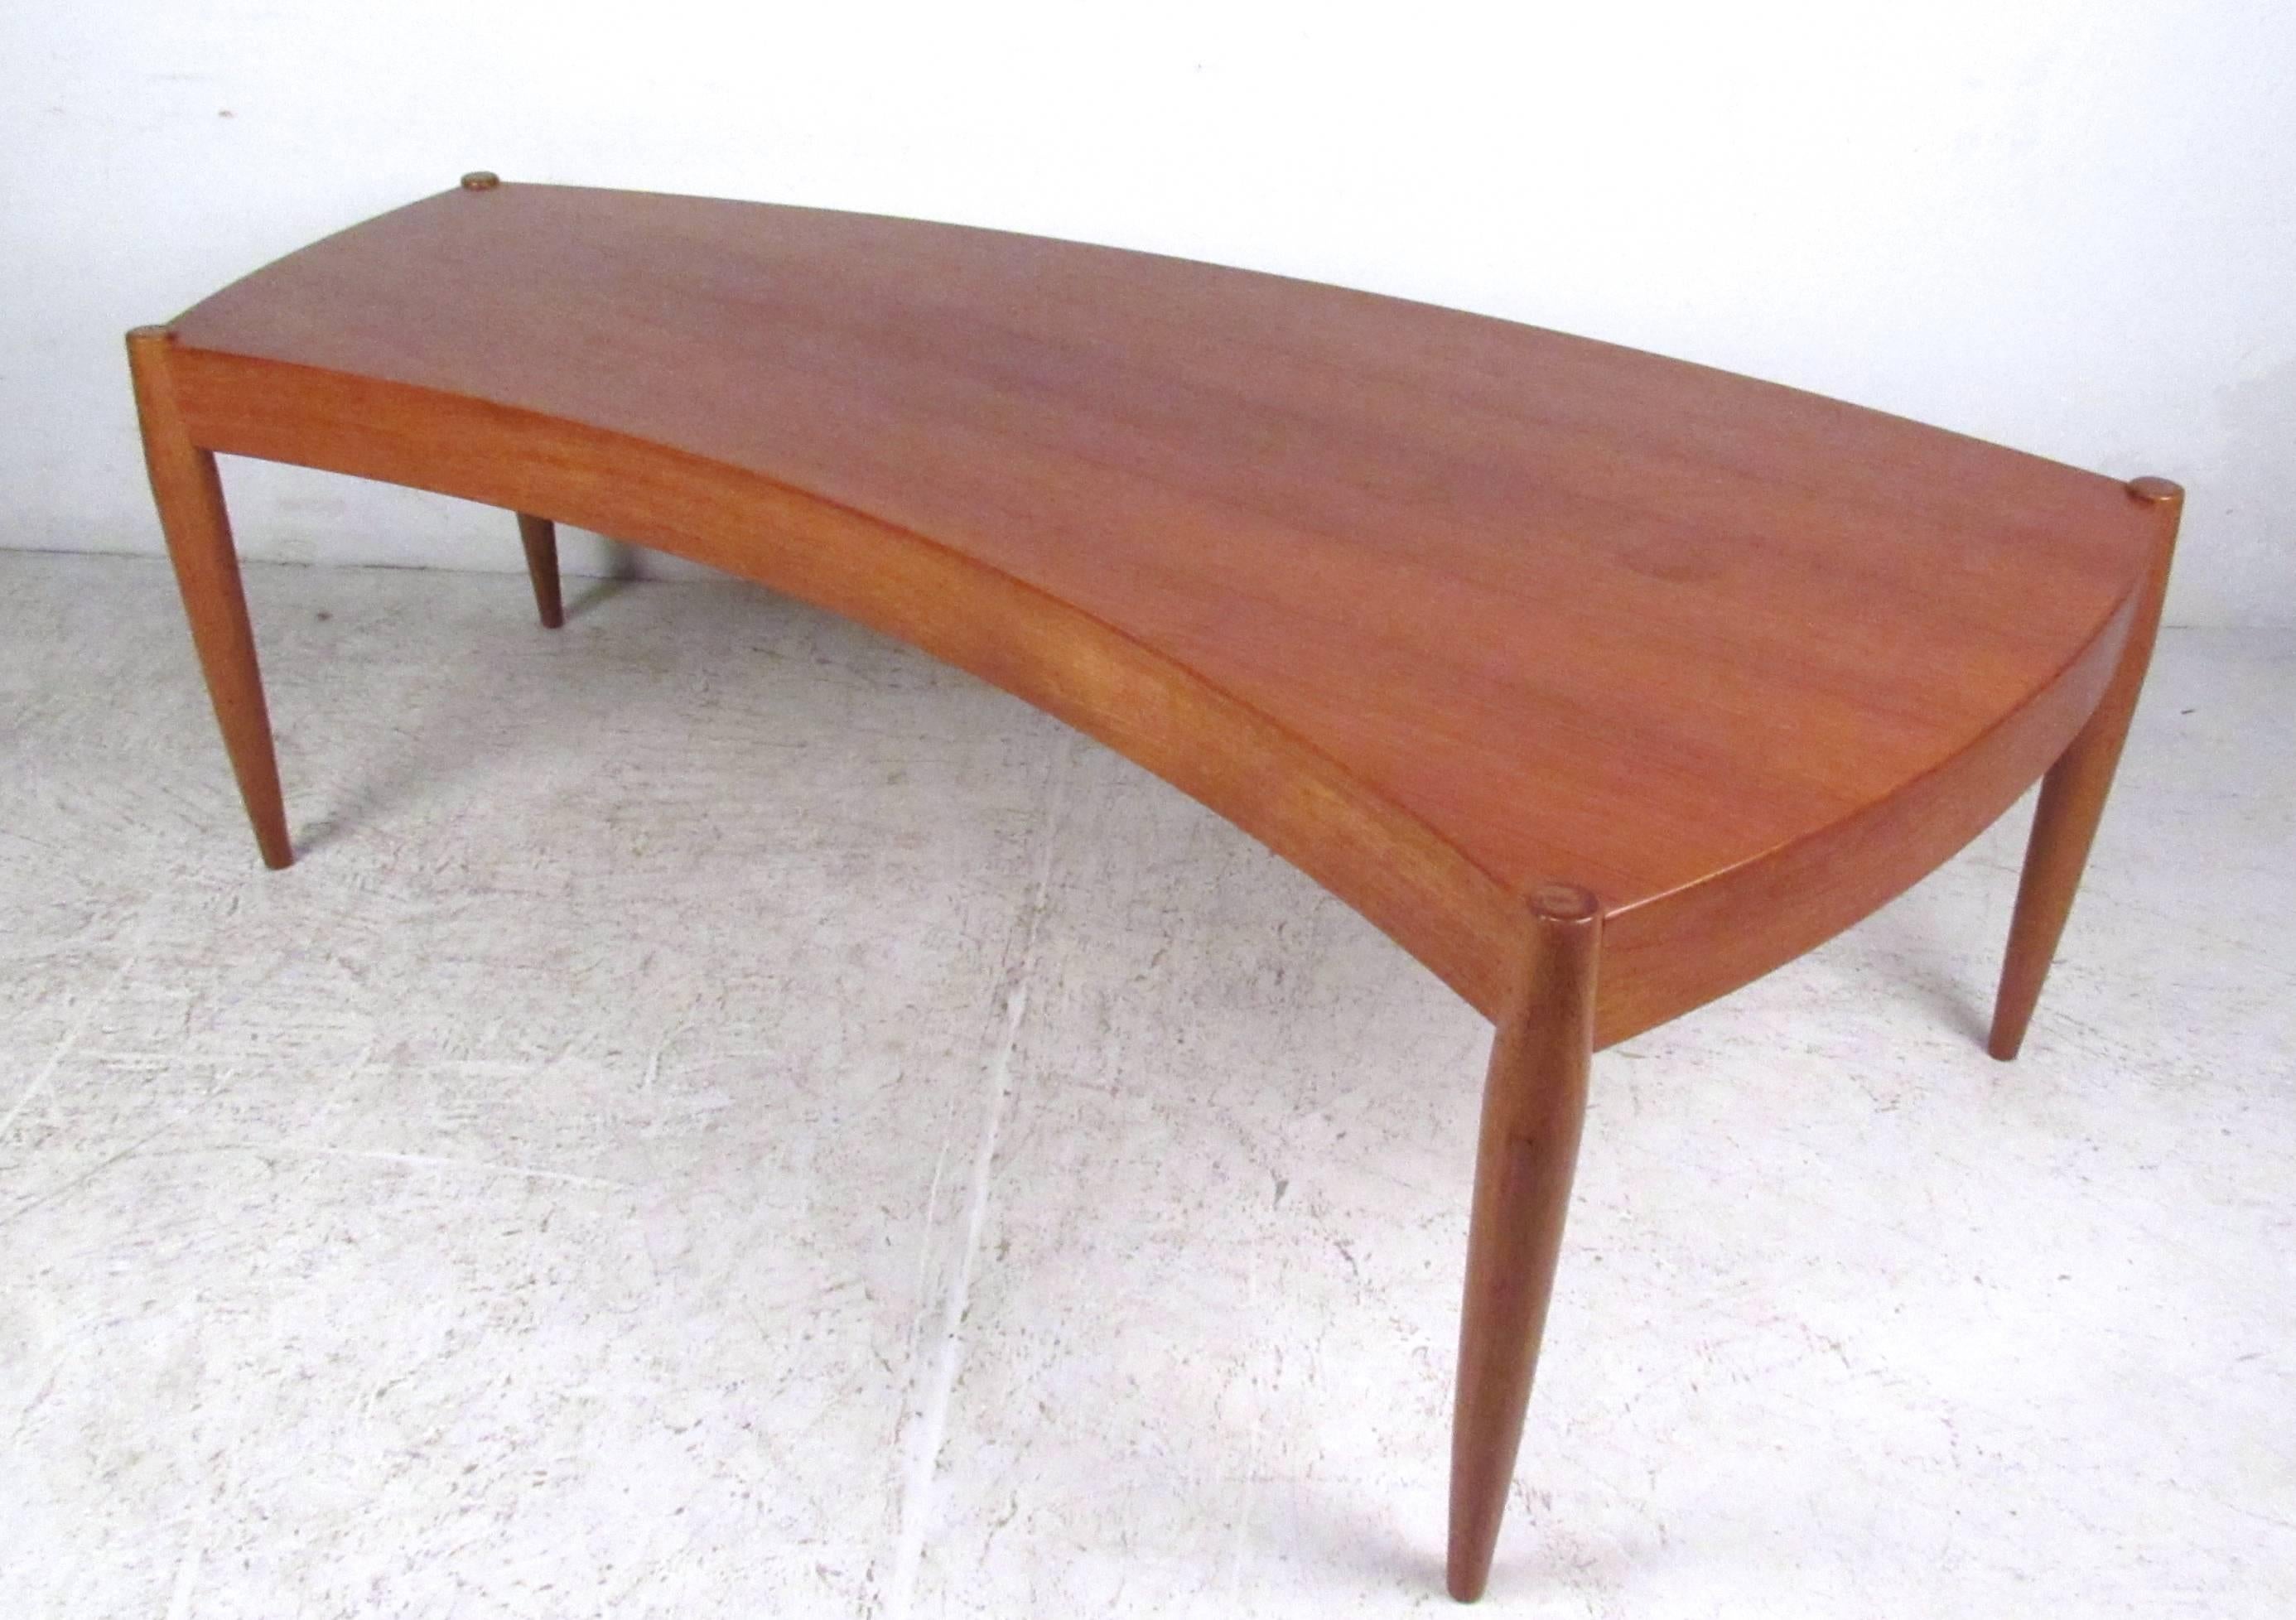 This beautiful vintage coffee table features a wonderful sculpted edge construction paired with tall tapered legs. Beautiful wood tone and unique shape makes this the perfect partner to the matching sofa and lounge chairs we also have available.